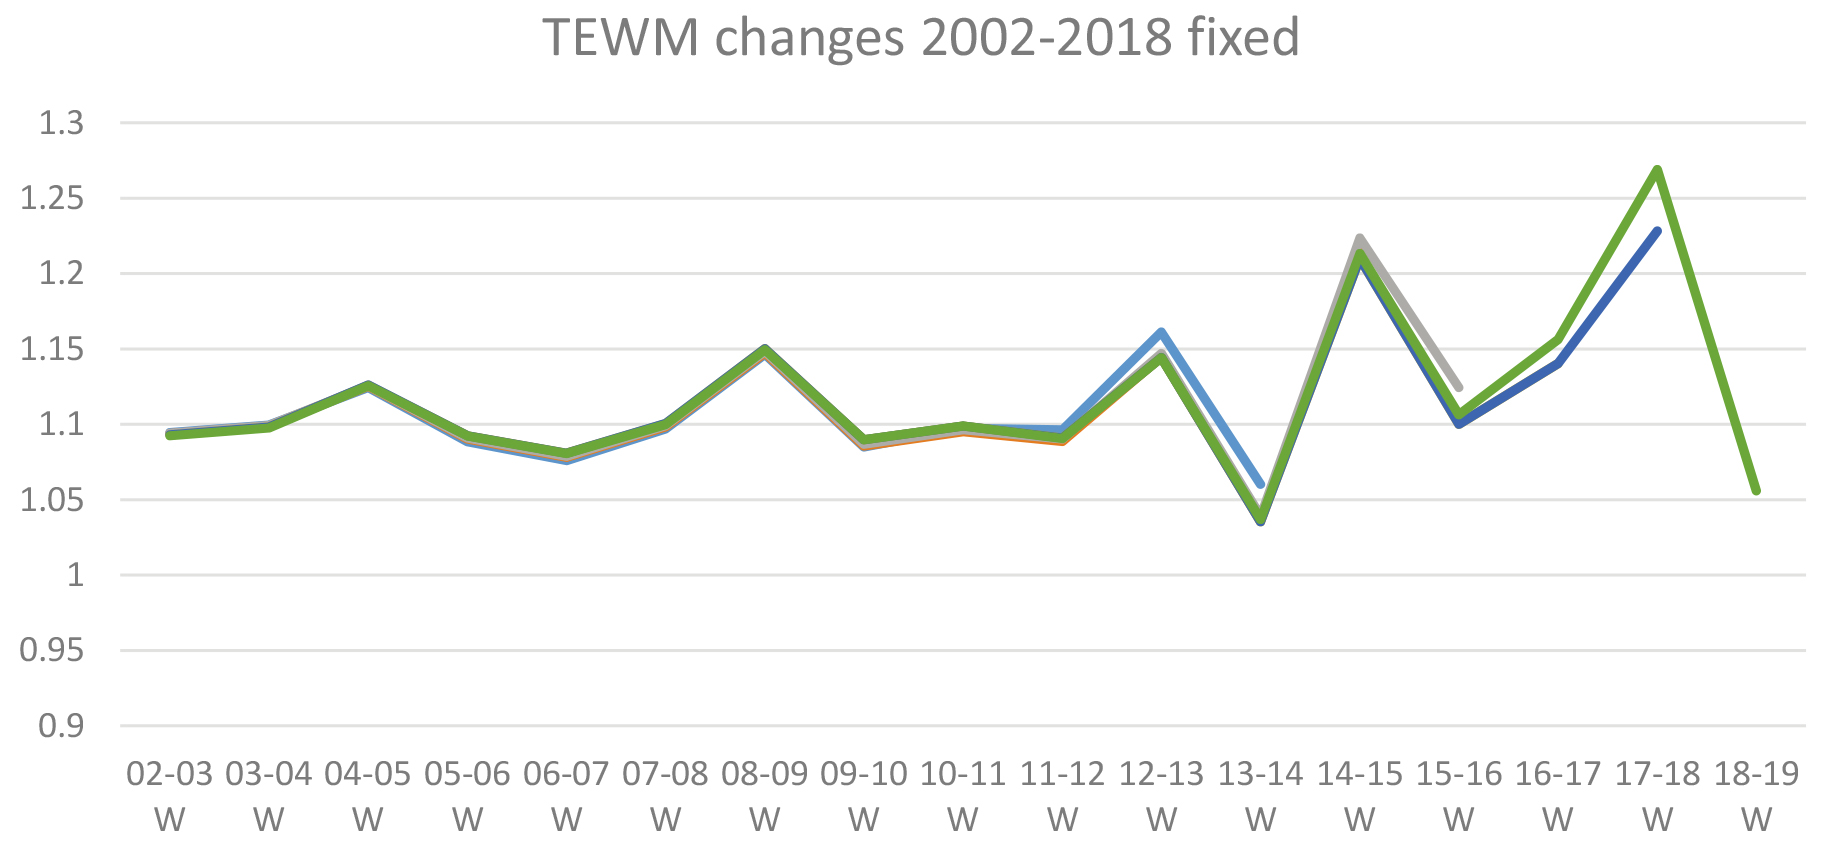 Estimated TEWM series as it evolves from first publication in 2002–3, with fixed outliers for winter 2014 and 2017. Each shade represents a different vintage of the series, and where they overlie each other revisions are minimal.